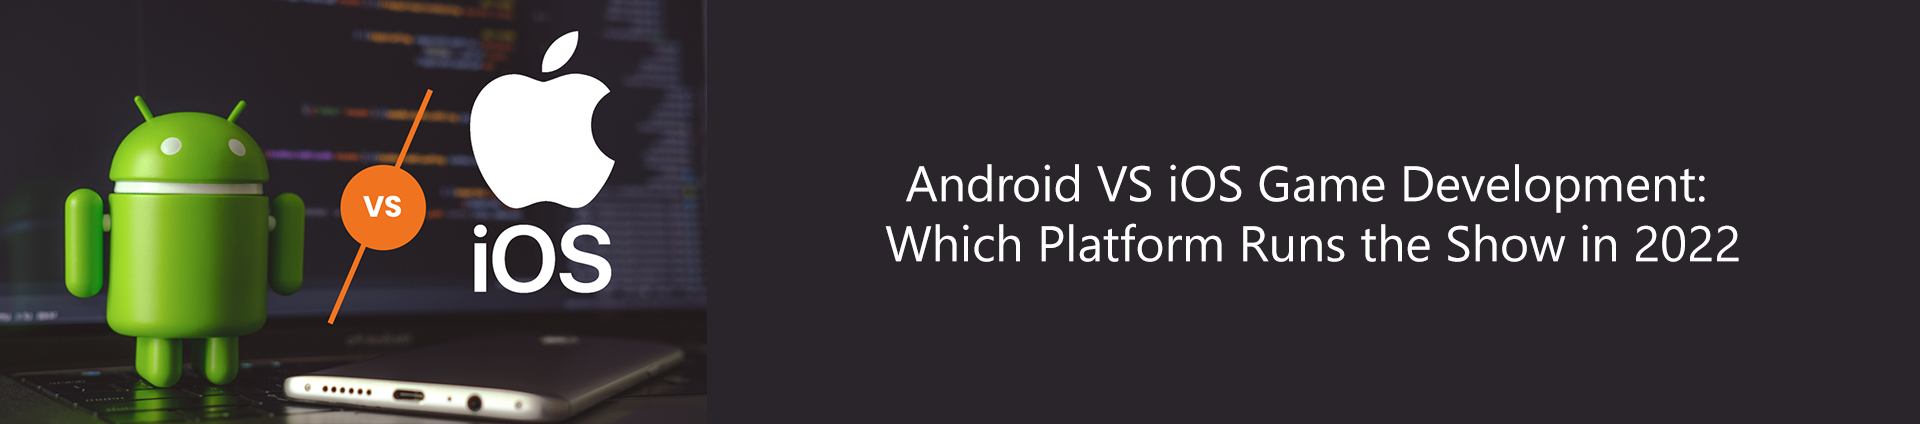 Android vs iOS Game Development in 2022